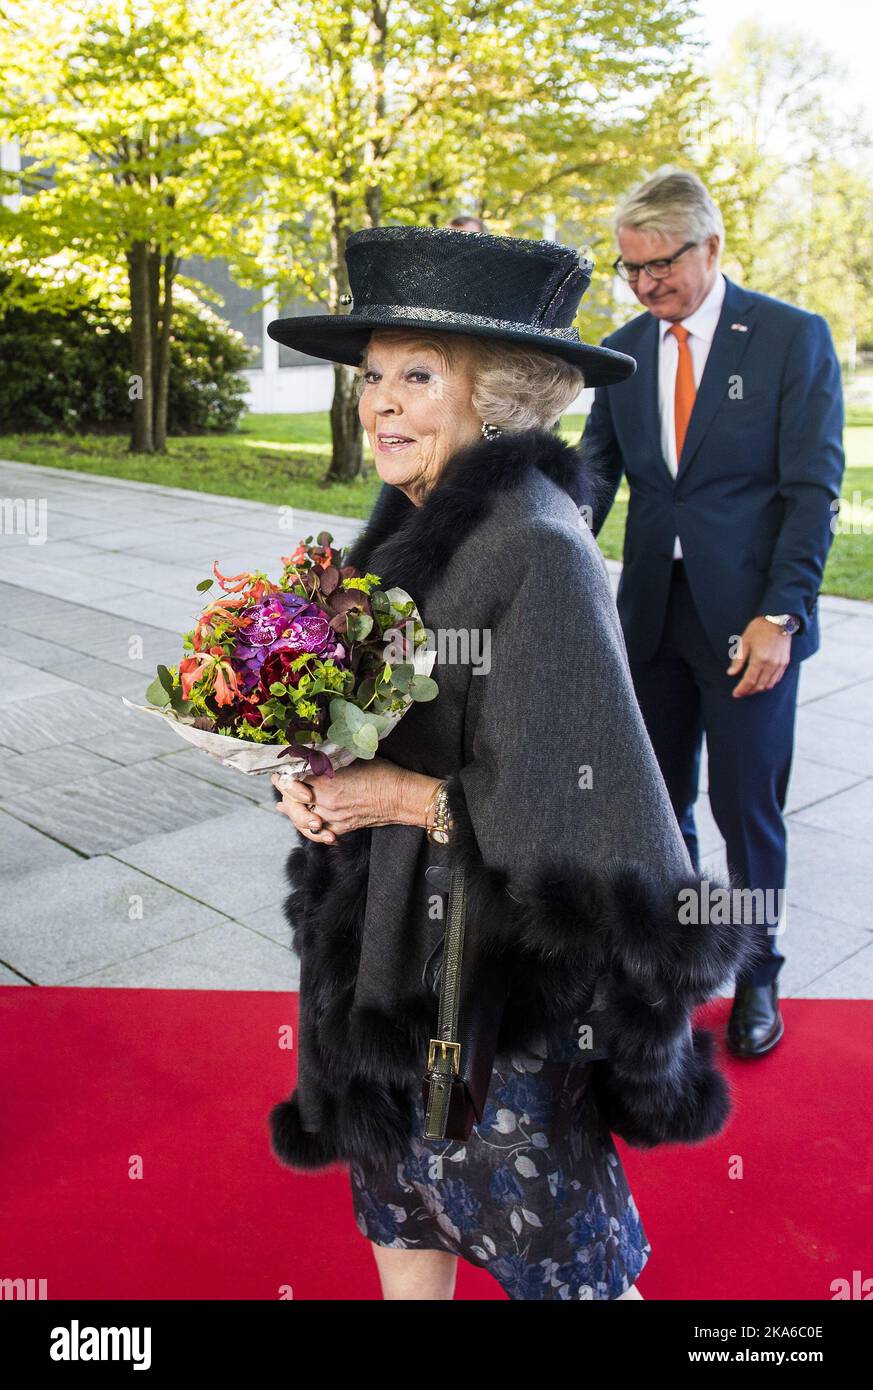 Oslo May 09, 2015. Princess Beatrix of the Netherlands, escorted by Oslo Mayor Fabian Stang, attends the opening of an exhibition pairing the works of artists Edvard Munch and Vincent van Gogh at the Munch Museum in Oslo. Phot by Fredrik Varfjell, NTB scanpix  Stock Photo